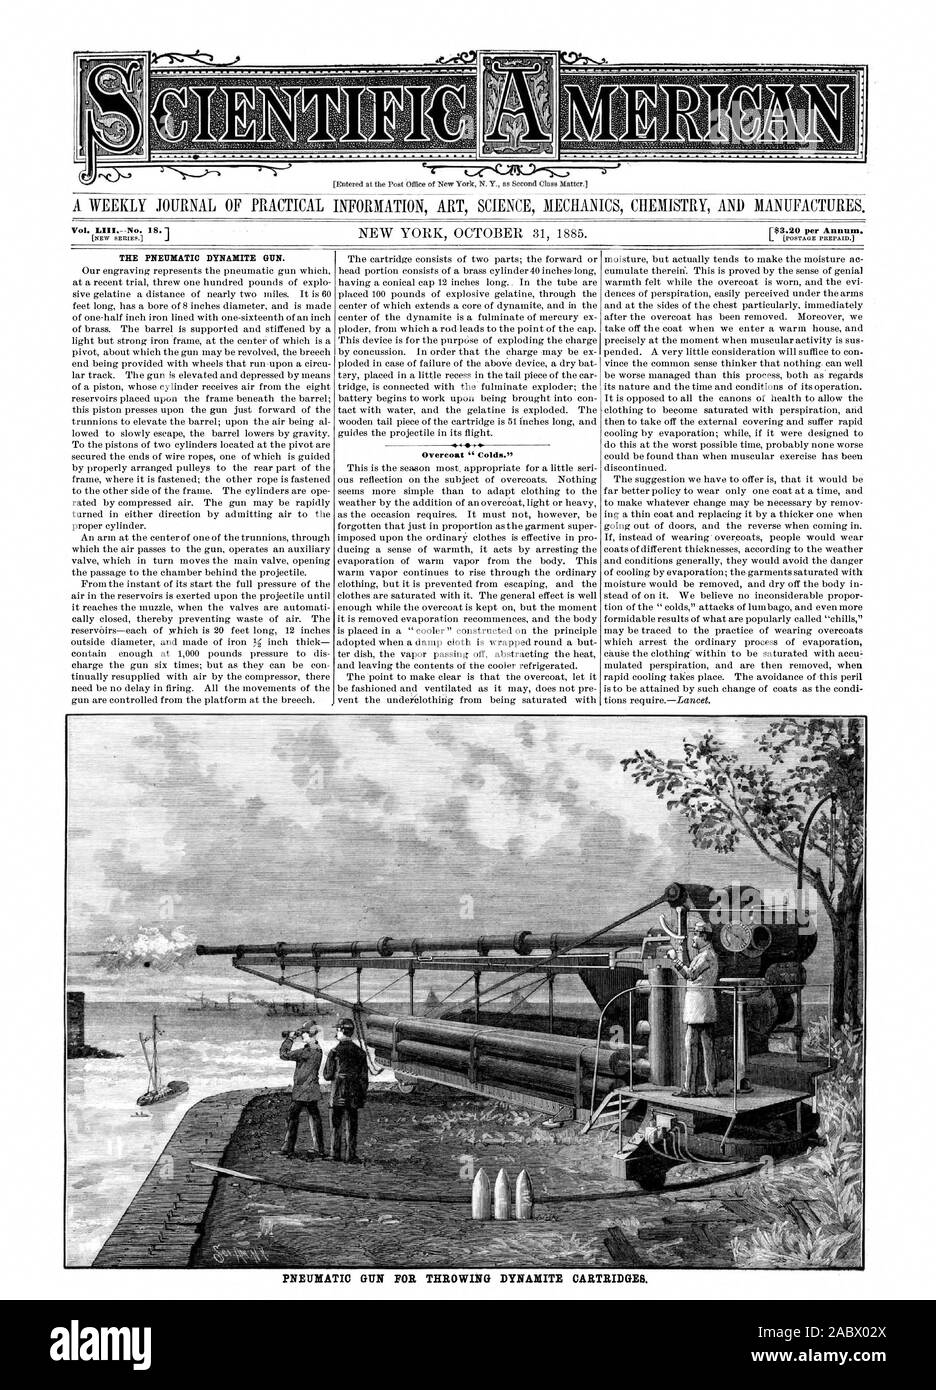 A WEEKLY JOURNAL OF PRACTICAL INFORMATION ART SCIENCE MECHANICS CHEMISTRY AND MANUFACTURES. 1$3.20 per Annum. THE PNEUMATIC DYNAMITE GUN. Overcoat if Colds.” All, scientific american, 1885-10-31 Stock Photo